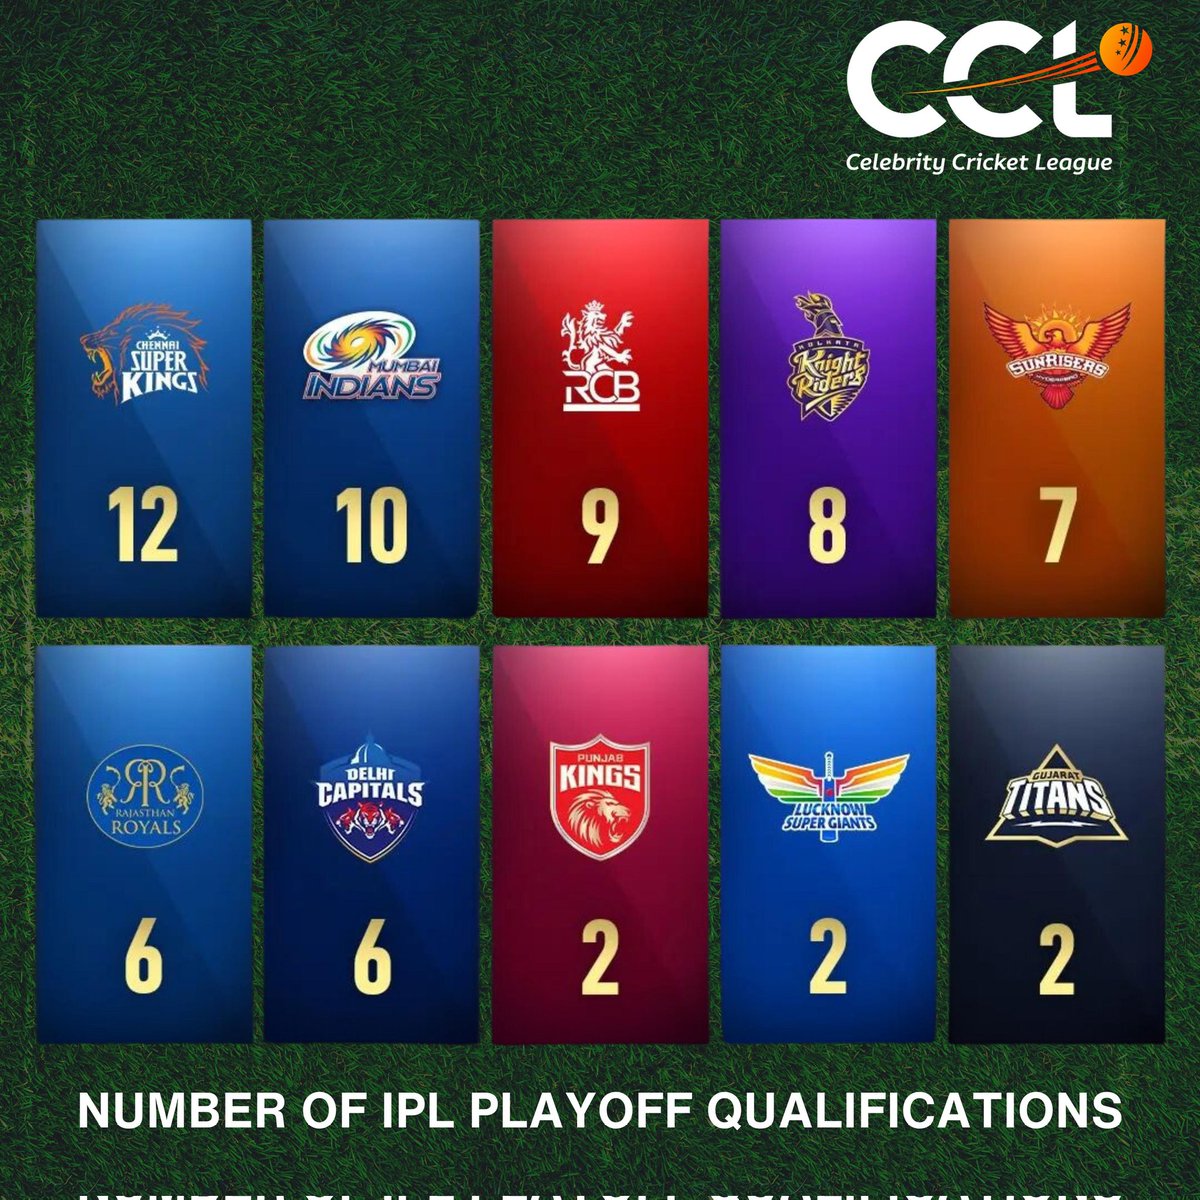 🏏 Check out the total number of IPL playoff qualifications for all teams! 🌟 Who's your favorite? 🏆 #IPL #IPLPlayoffs #RR #KKR #RCB #RR #Cricket #CricketLovers #TeamSpirit #PlayoffBound #IPL2024 #ccl